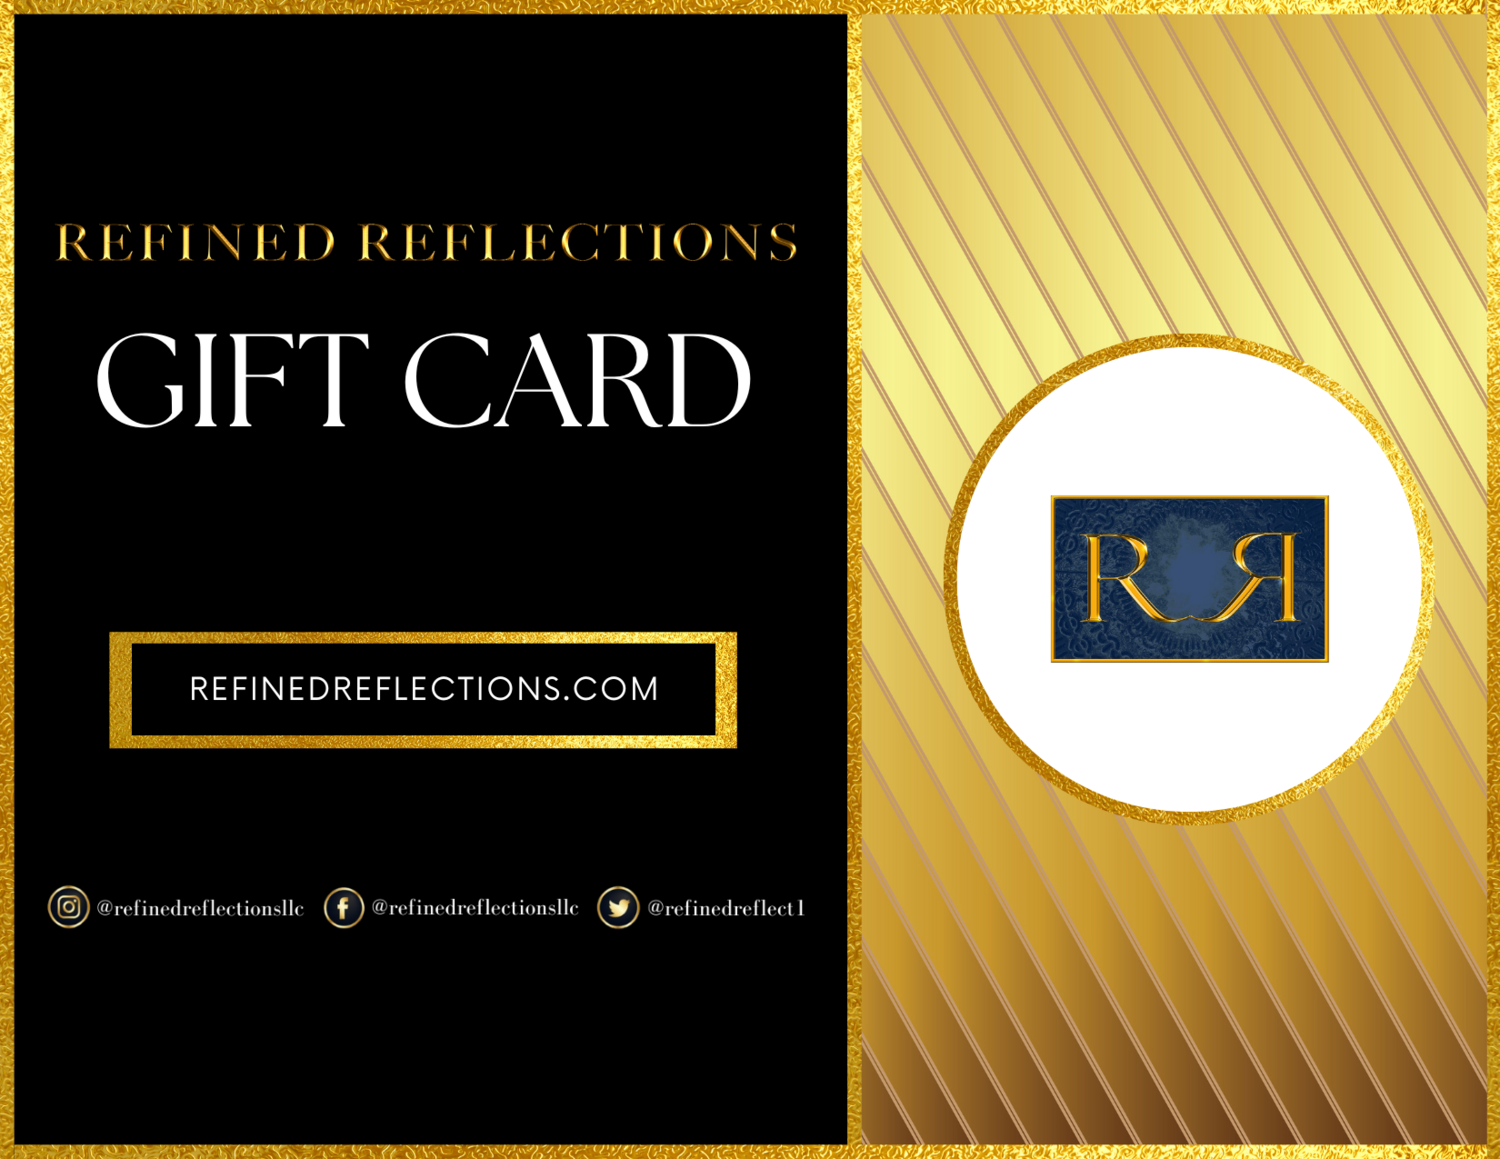 Refined Reflections Gift Card